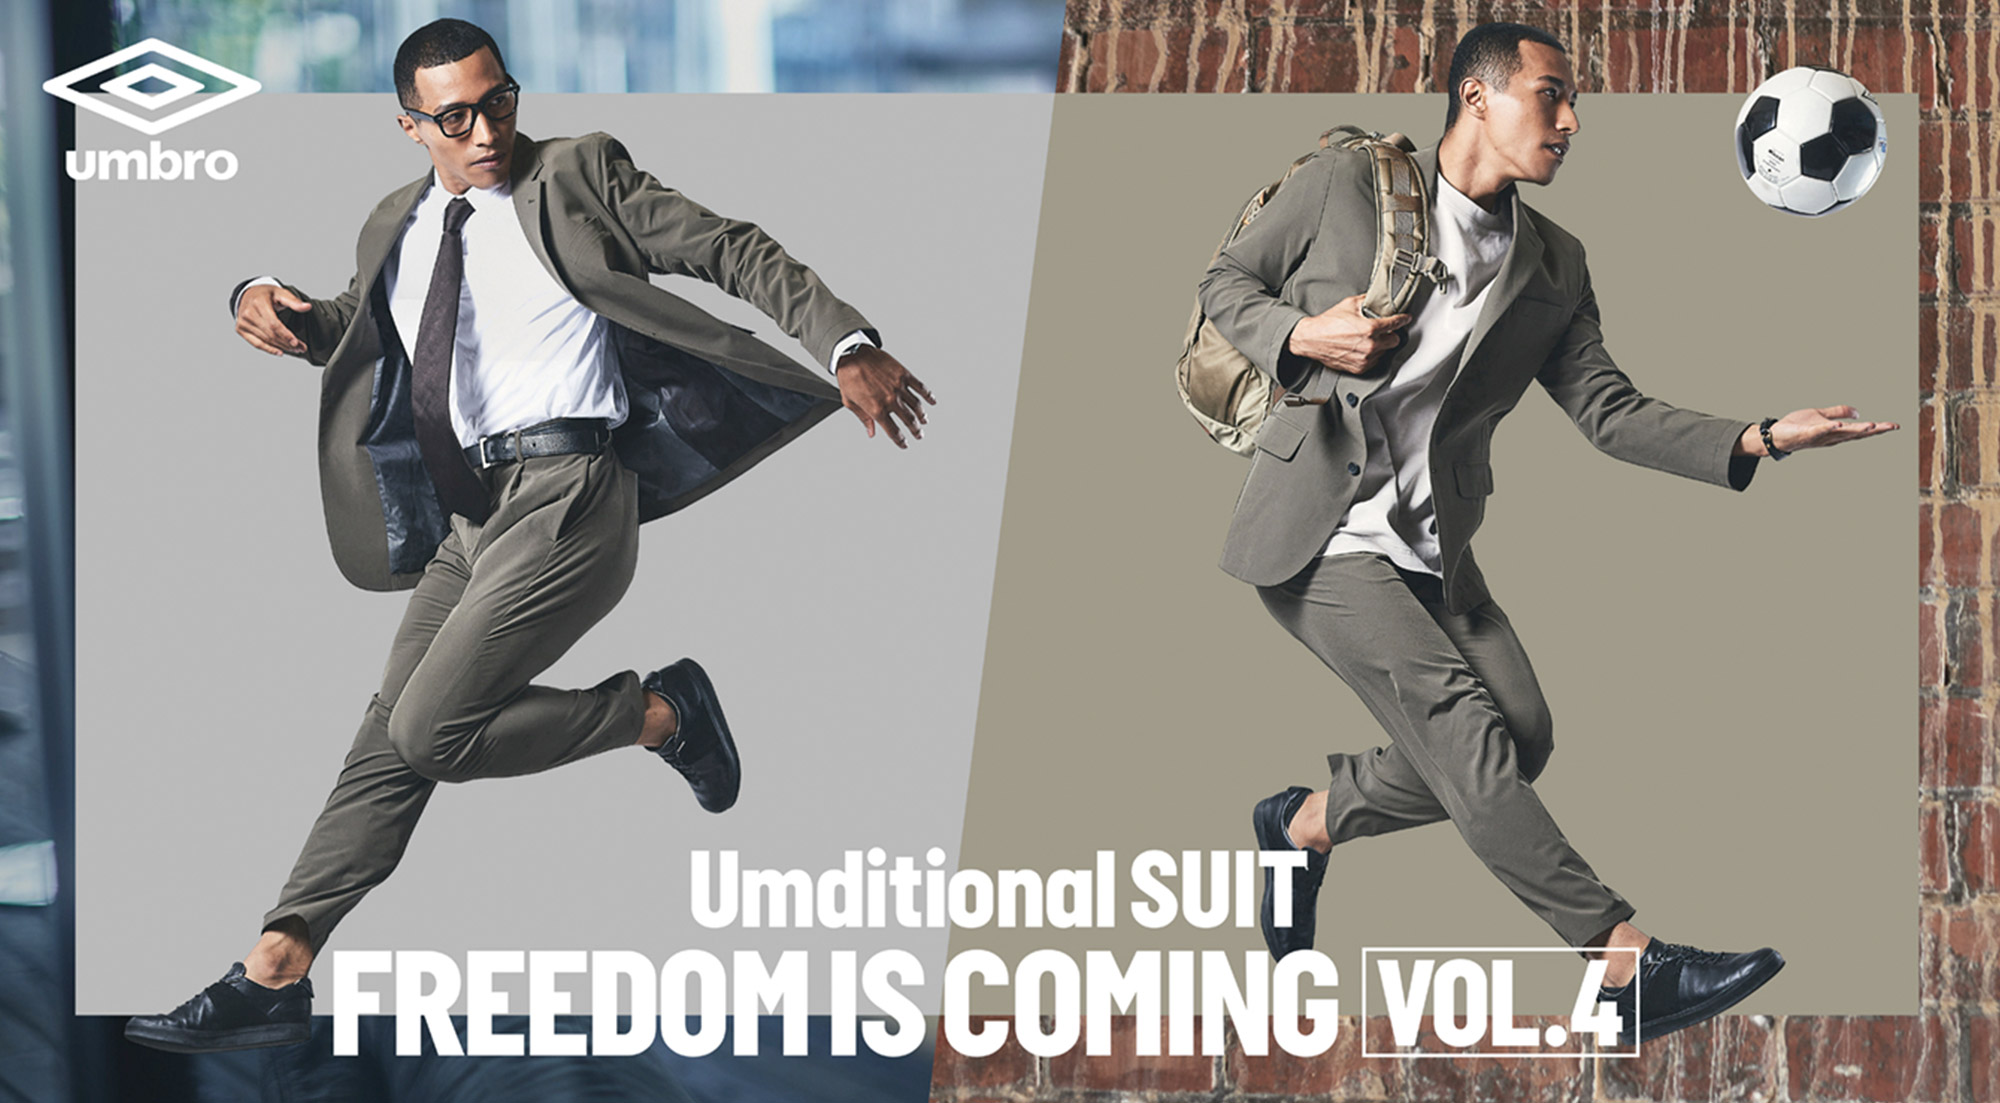 GWG®inc. | Works | Promotion | umbro / 2021AW Umditional Suit Visual